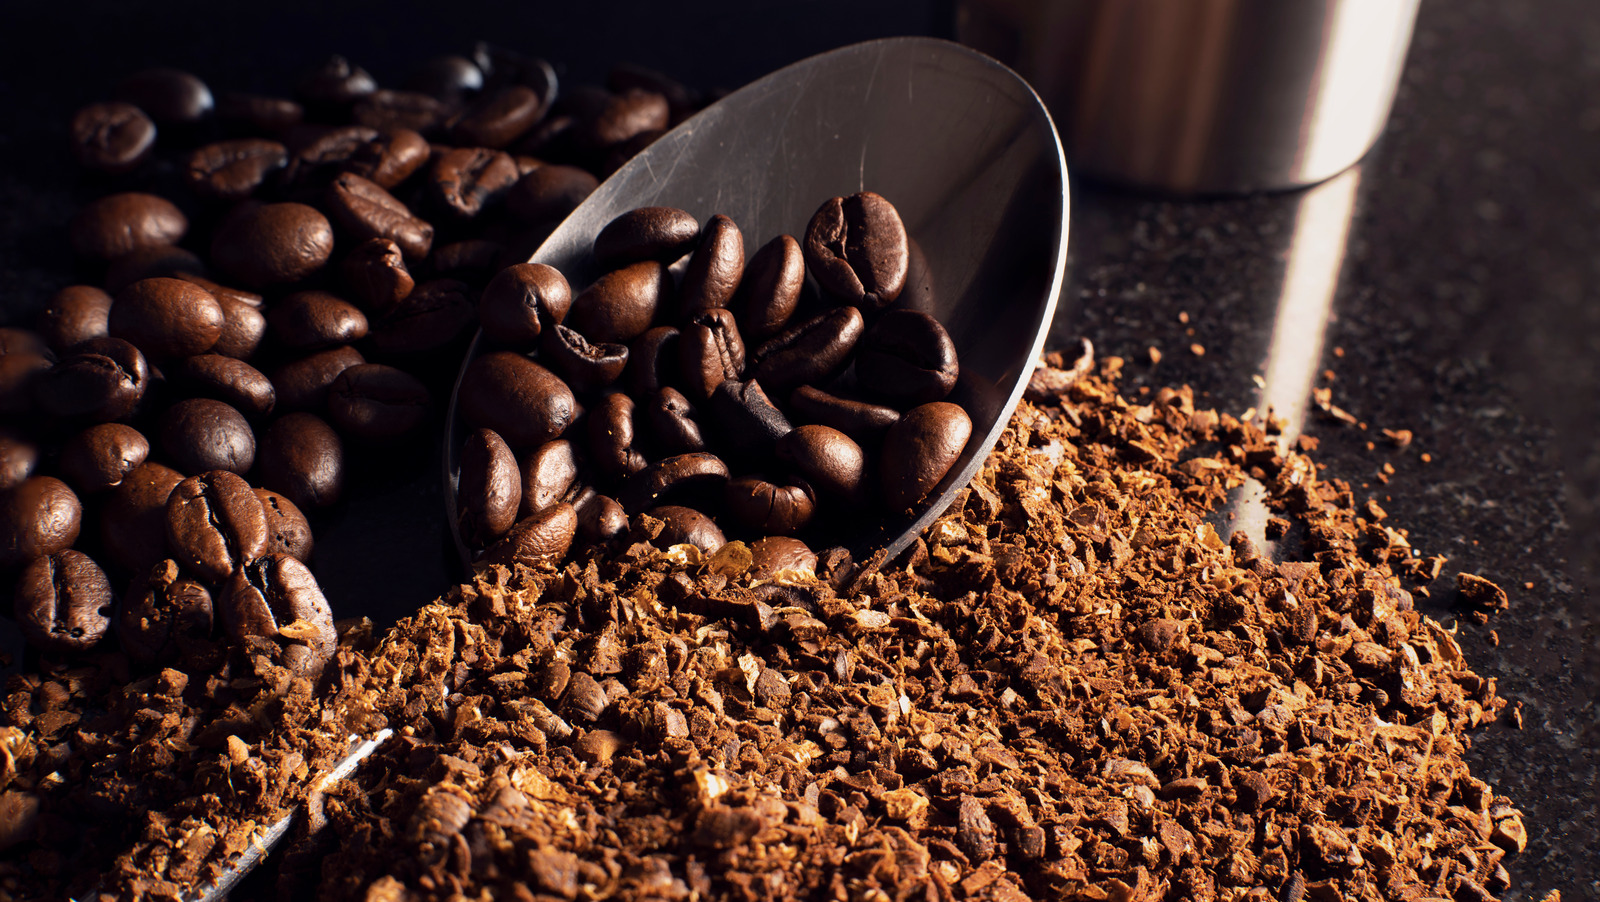 How to Grind Coffee Beans with a Blender